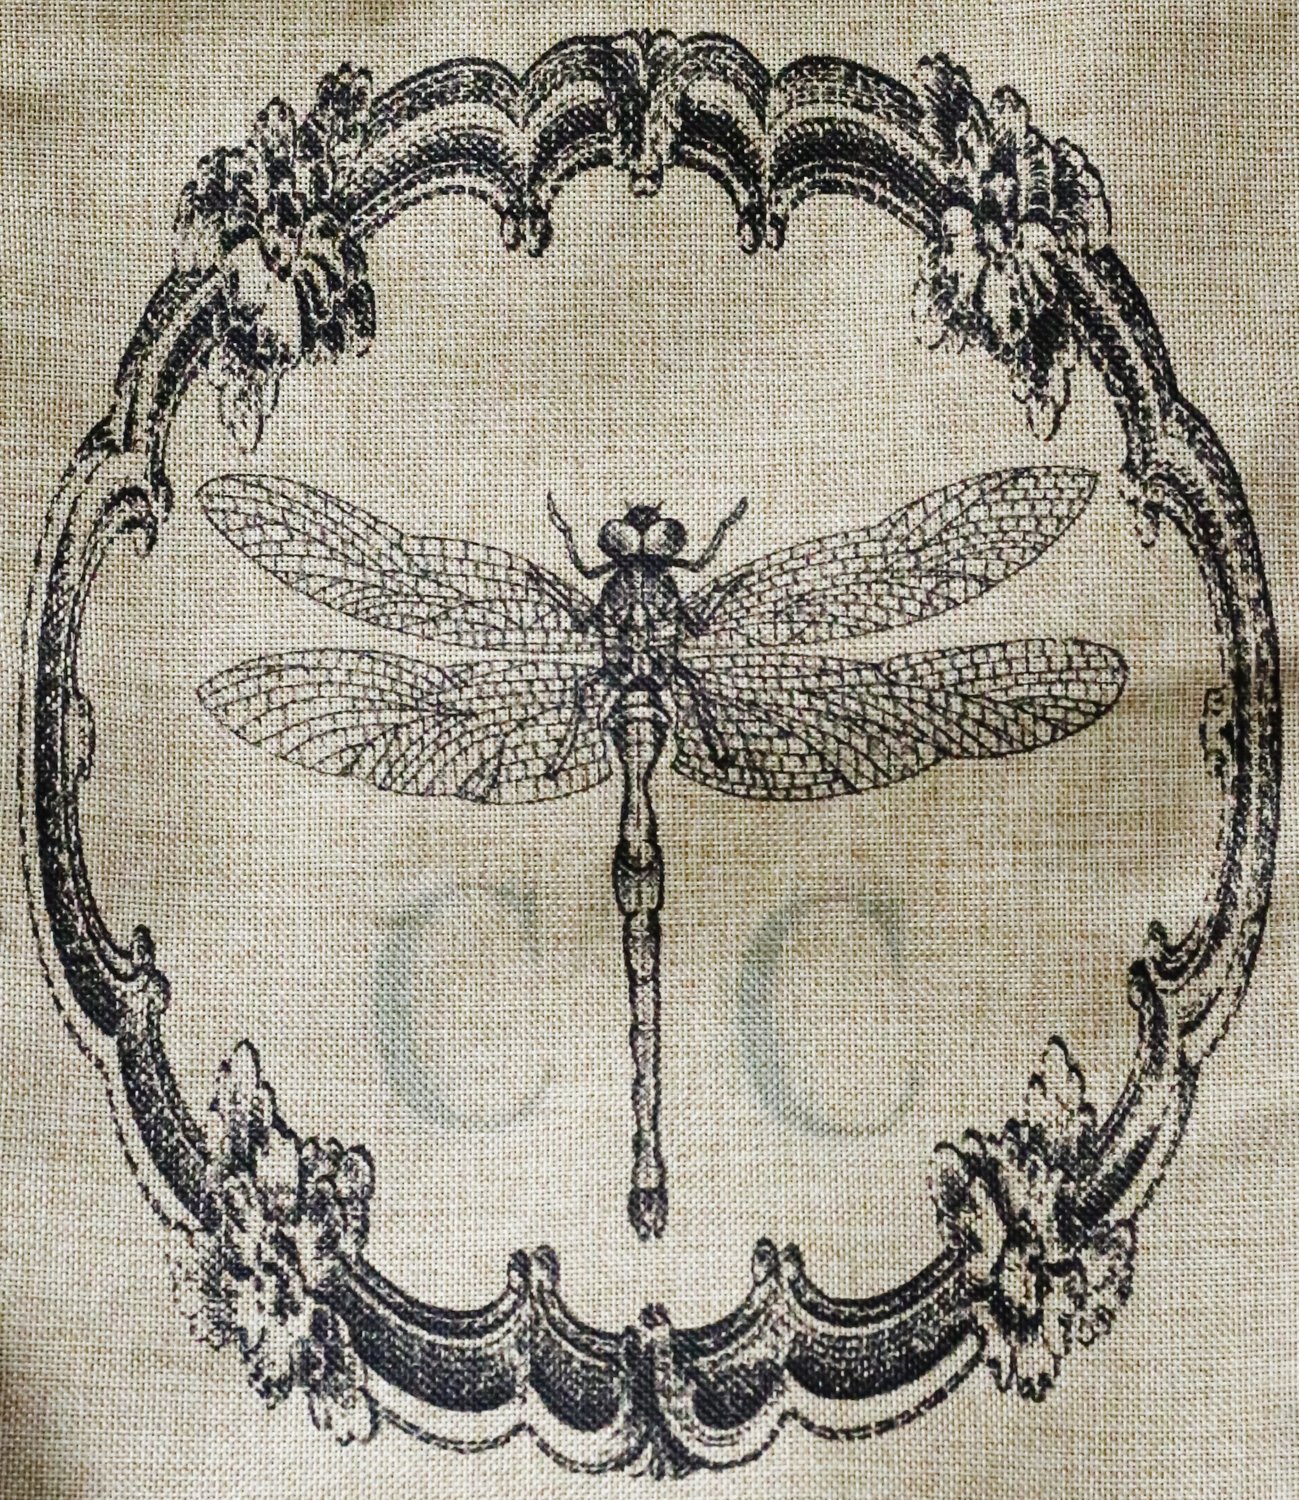 The dragonfly logo used by Fisher.